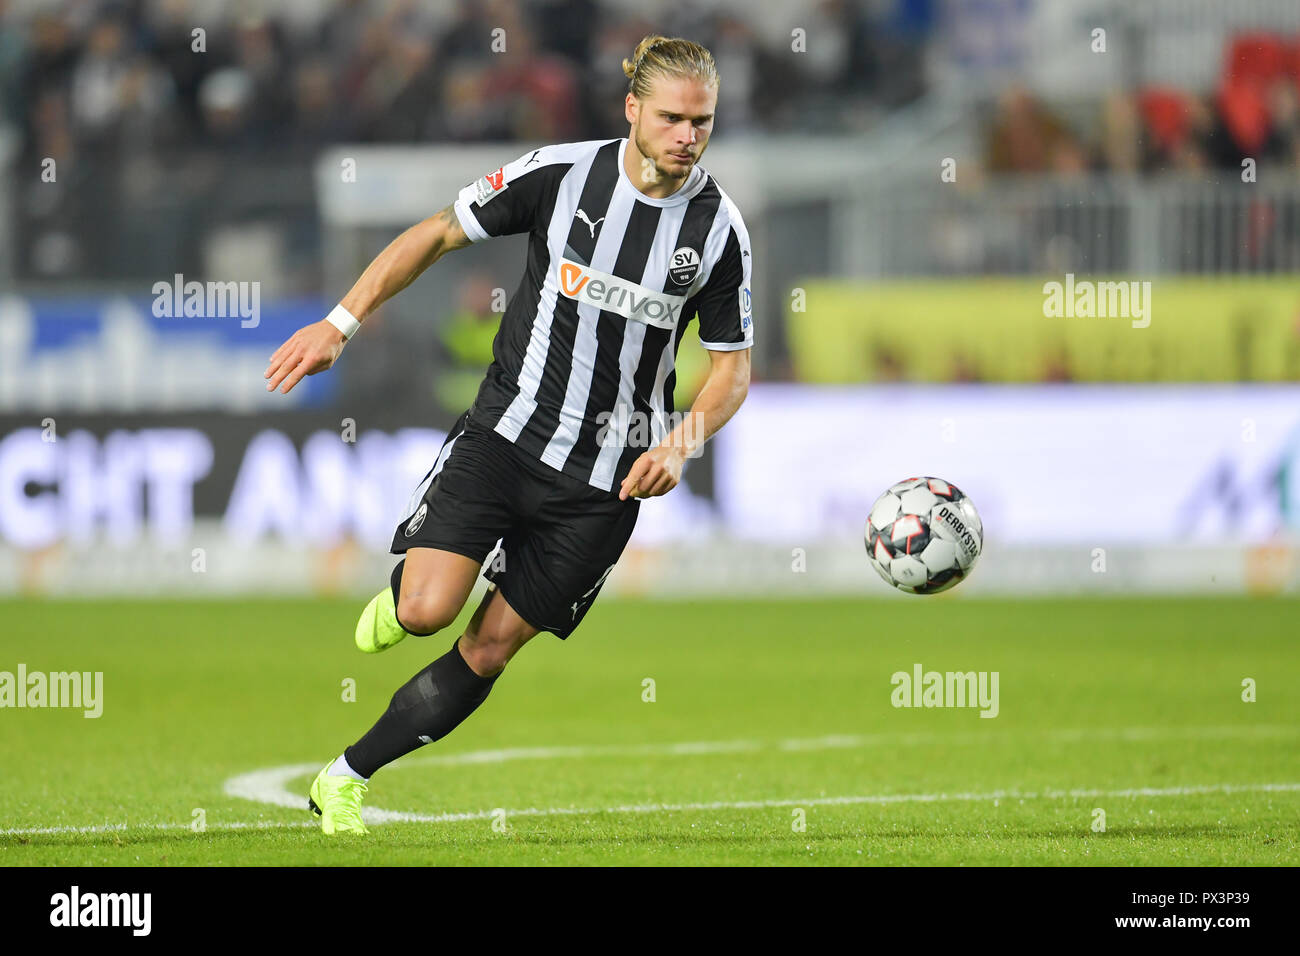 Sandhausen, Germany. 19th Oct, 2018. 19 October 2018, Germany, Sandhausen: Soccer: 2nd Bundesliga, SV Sandhausen - FC Ingolstadt 04, 10th matchday, in Hardtwaldstadion. Sandhausen's Rurik Gislason plays the ball. Credit: Uwe Anspach/dpa - IMPORTANT NOTICE: DFL an d DFB regulations prohibit any use of photographs as image sequences and/or quasi-video./dpa/Alamy Live News Stock Photo